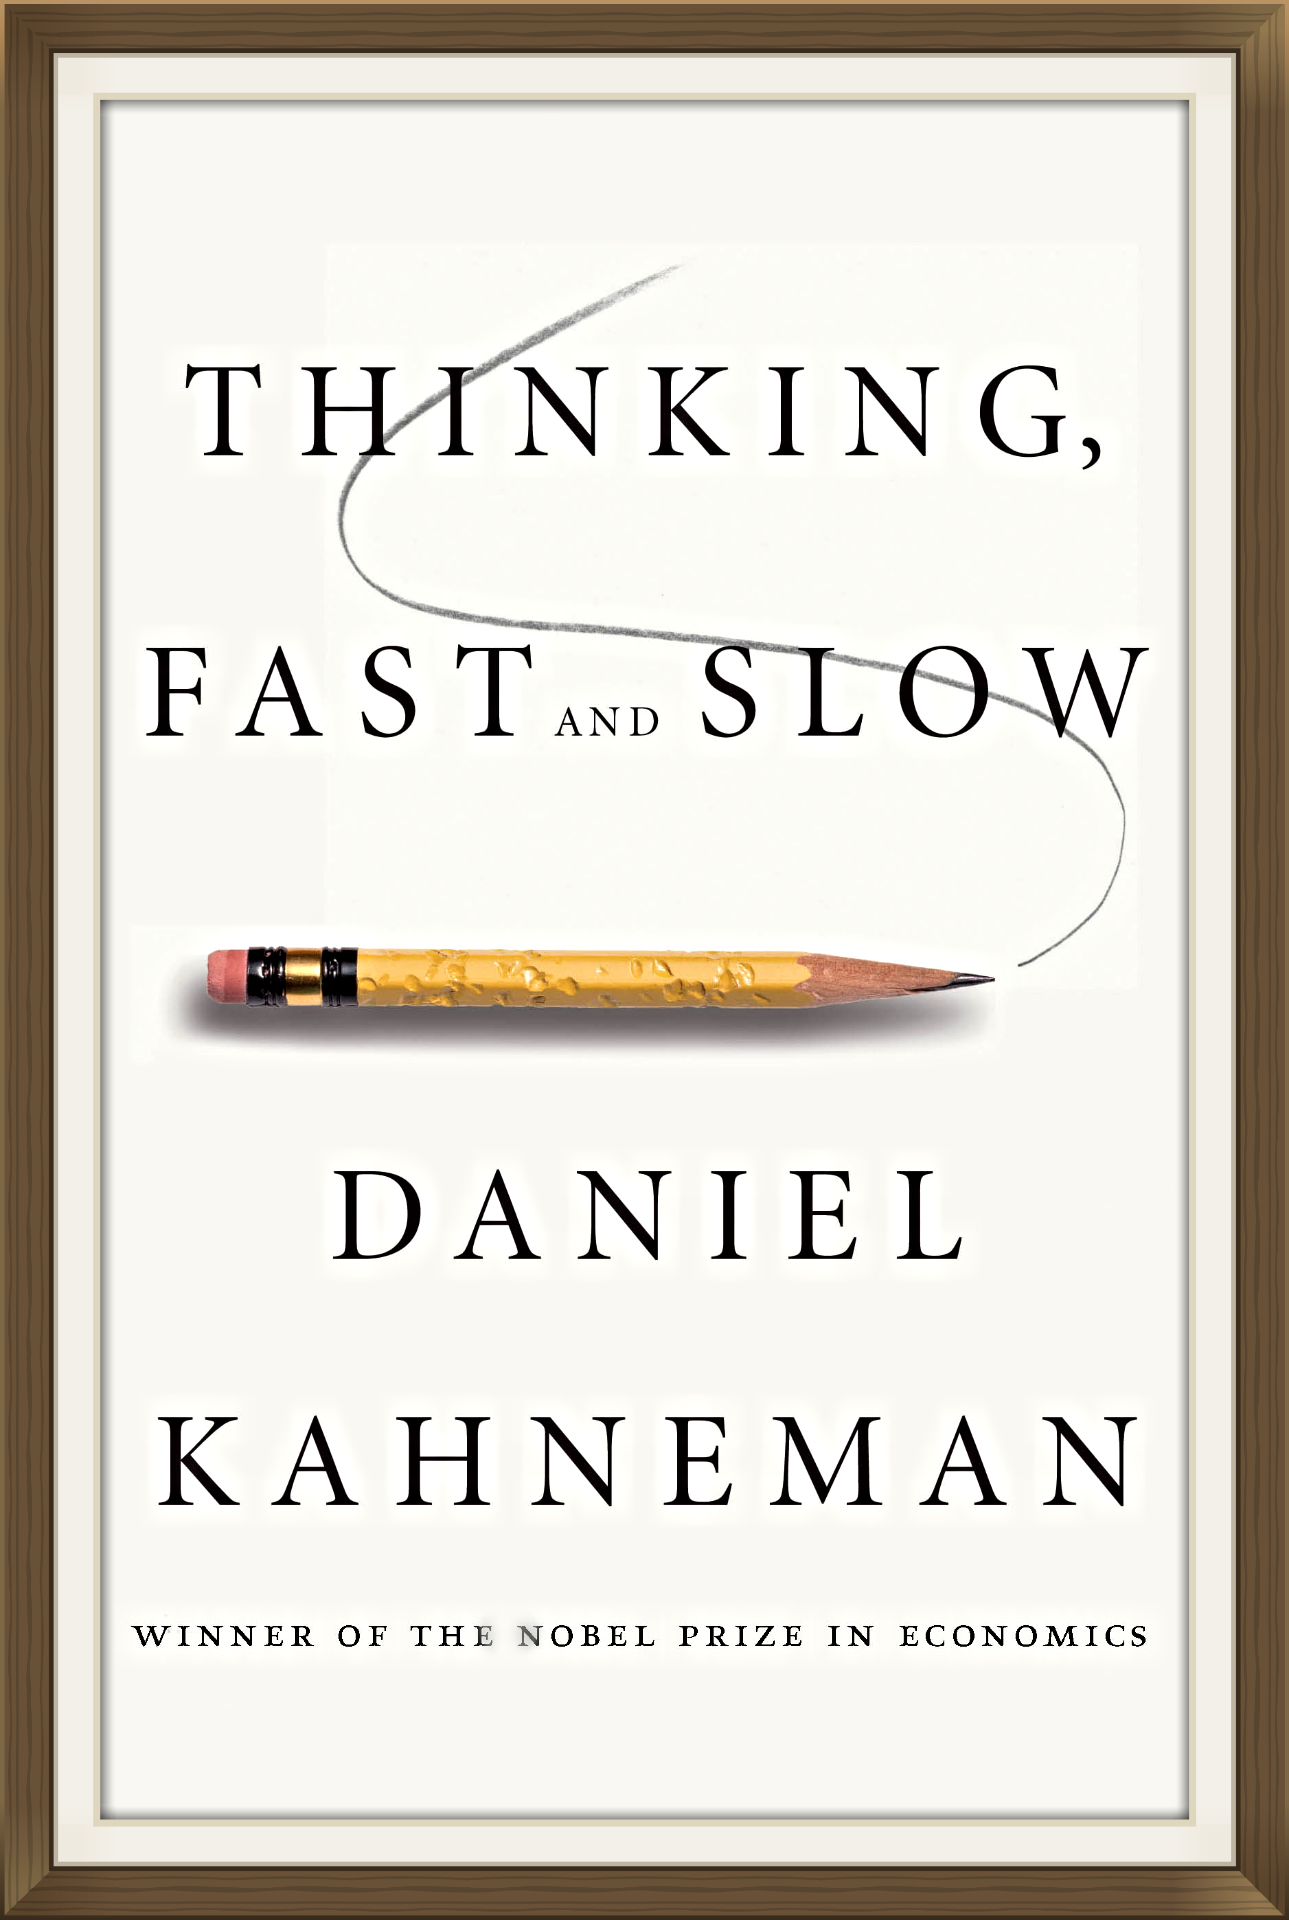 book summary - Thinking, Fast and Slow by Daniel Kahneman